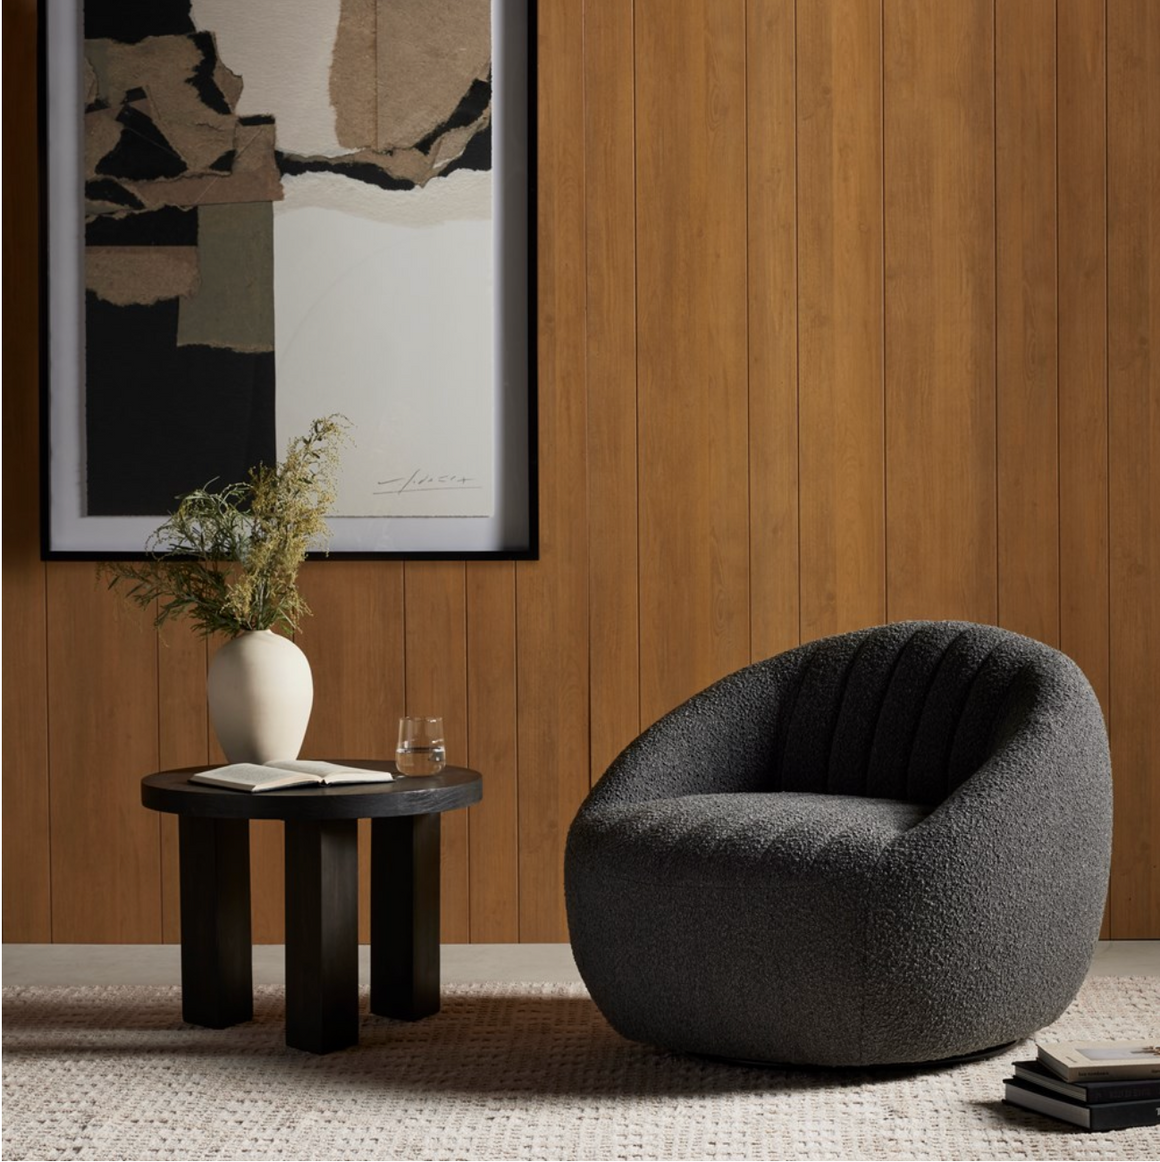 Clementine 35" Swivel Chair - Performance Charcoal